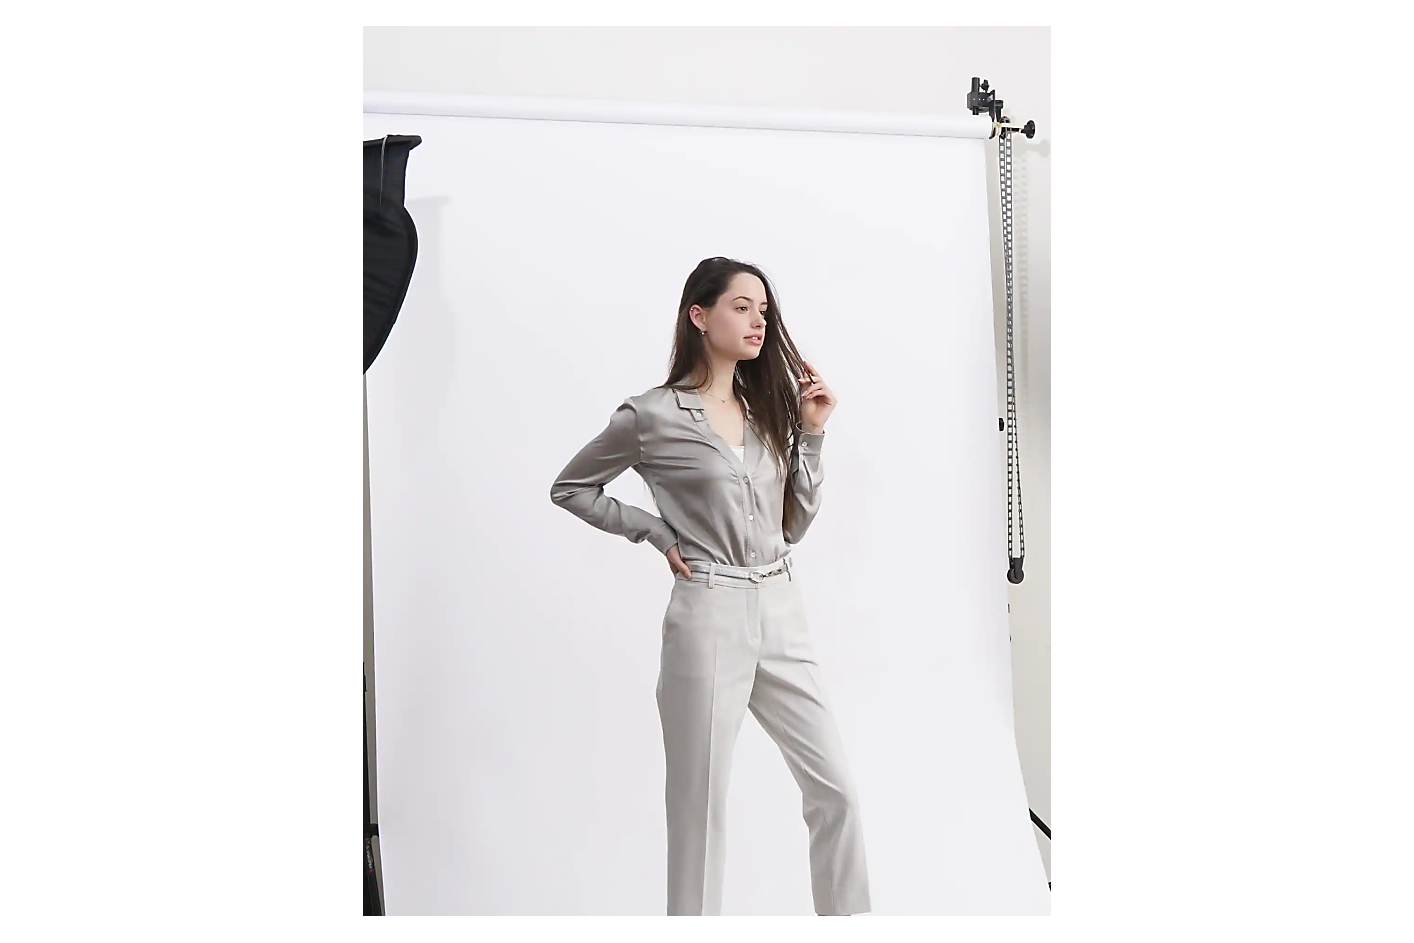 A woman in a light grey outfit poses in front of a white backdrop in a photo studio.